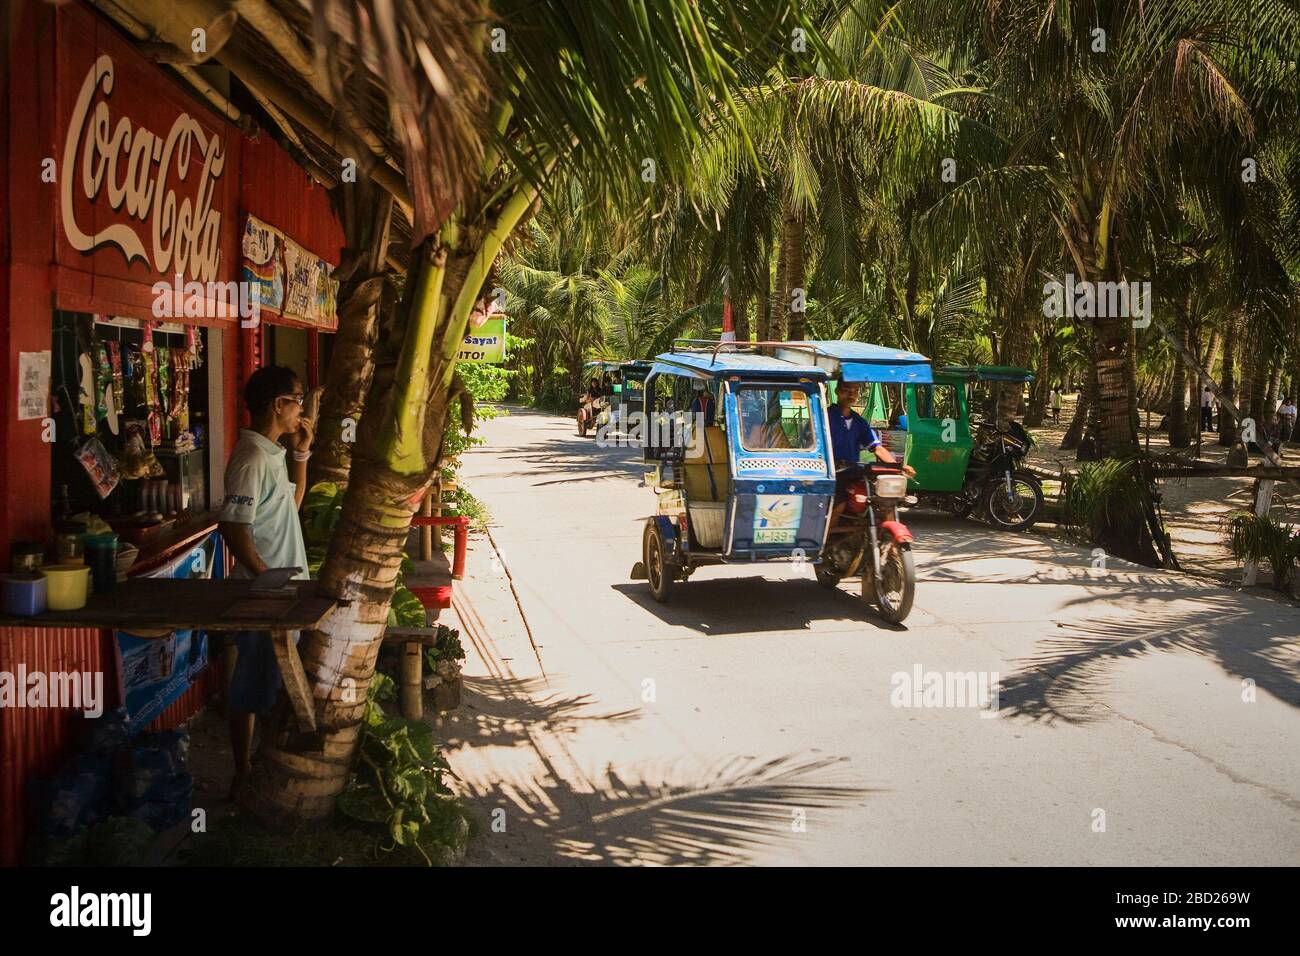 A tuk tuk passes a kiosk in a palm forest on Boracay. Stock Photo